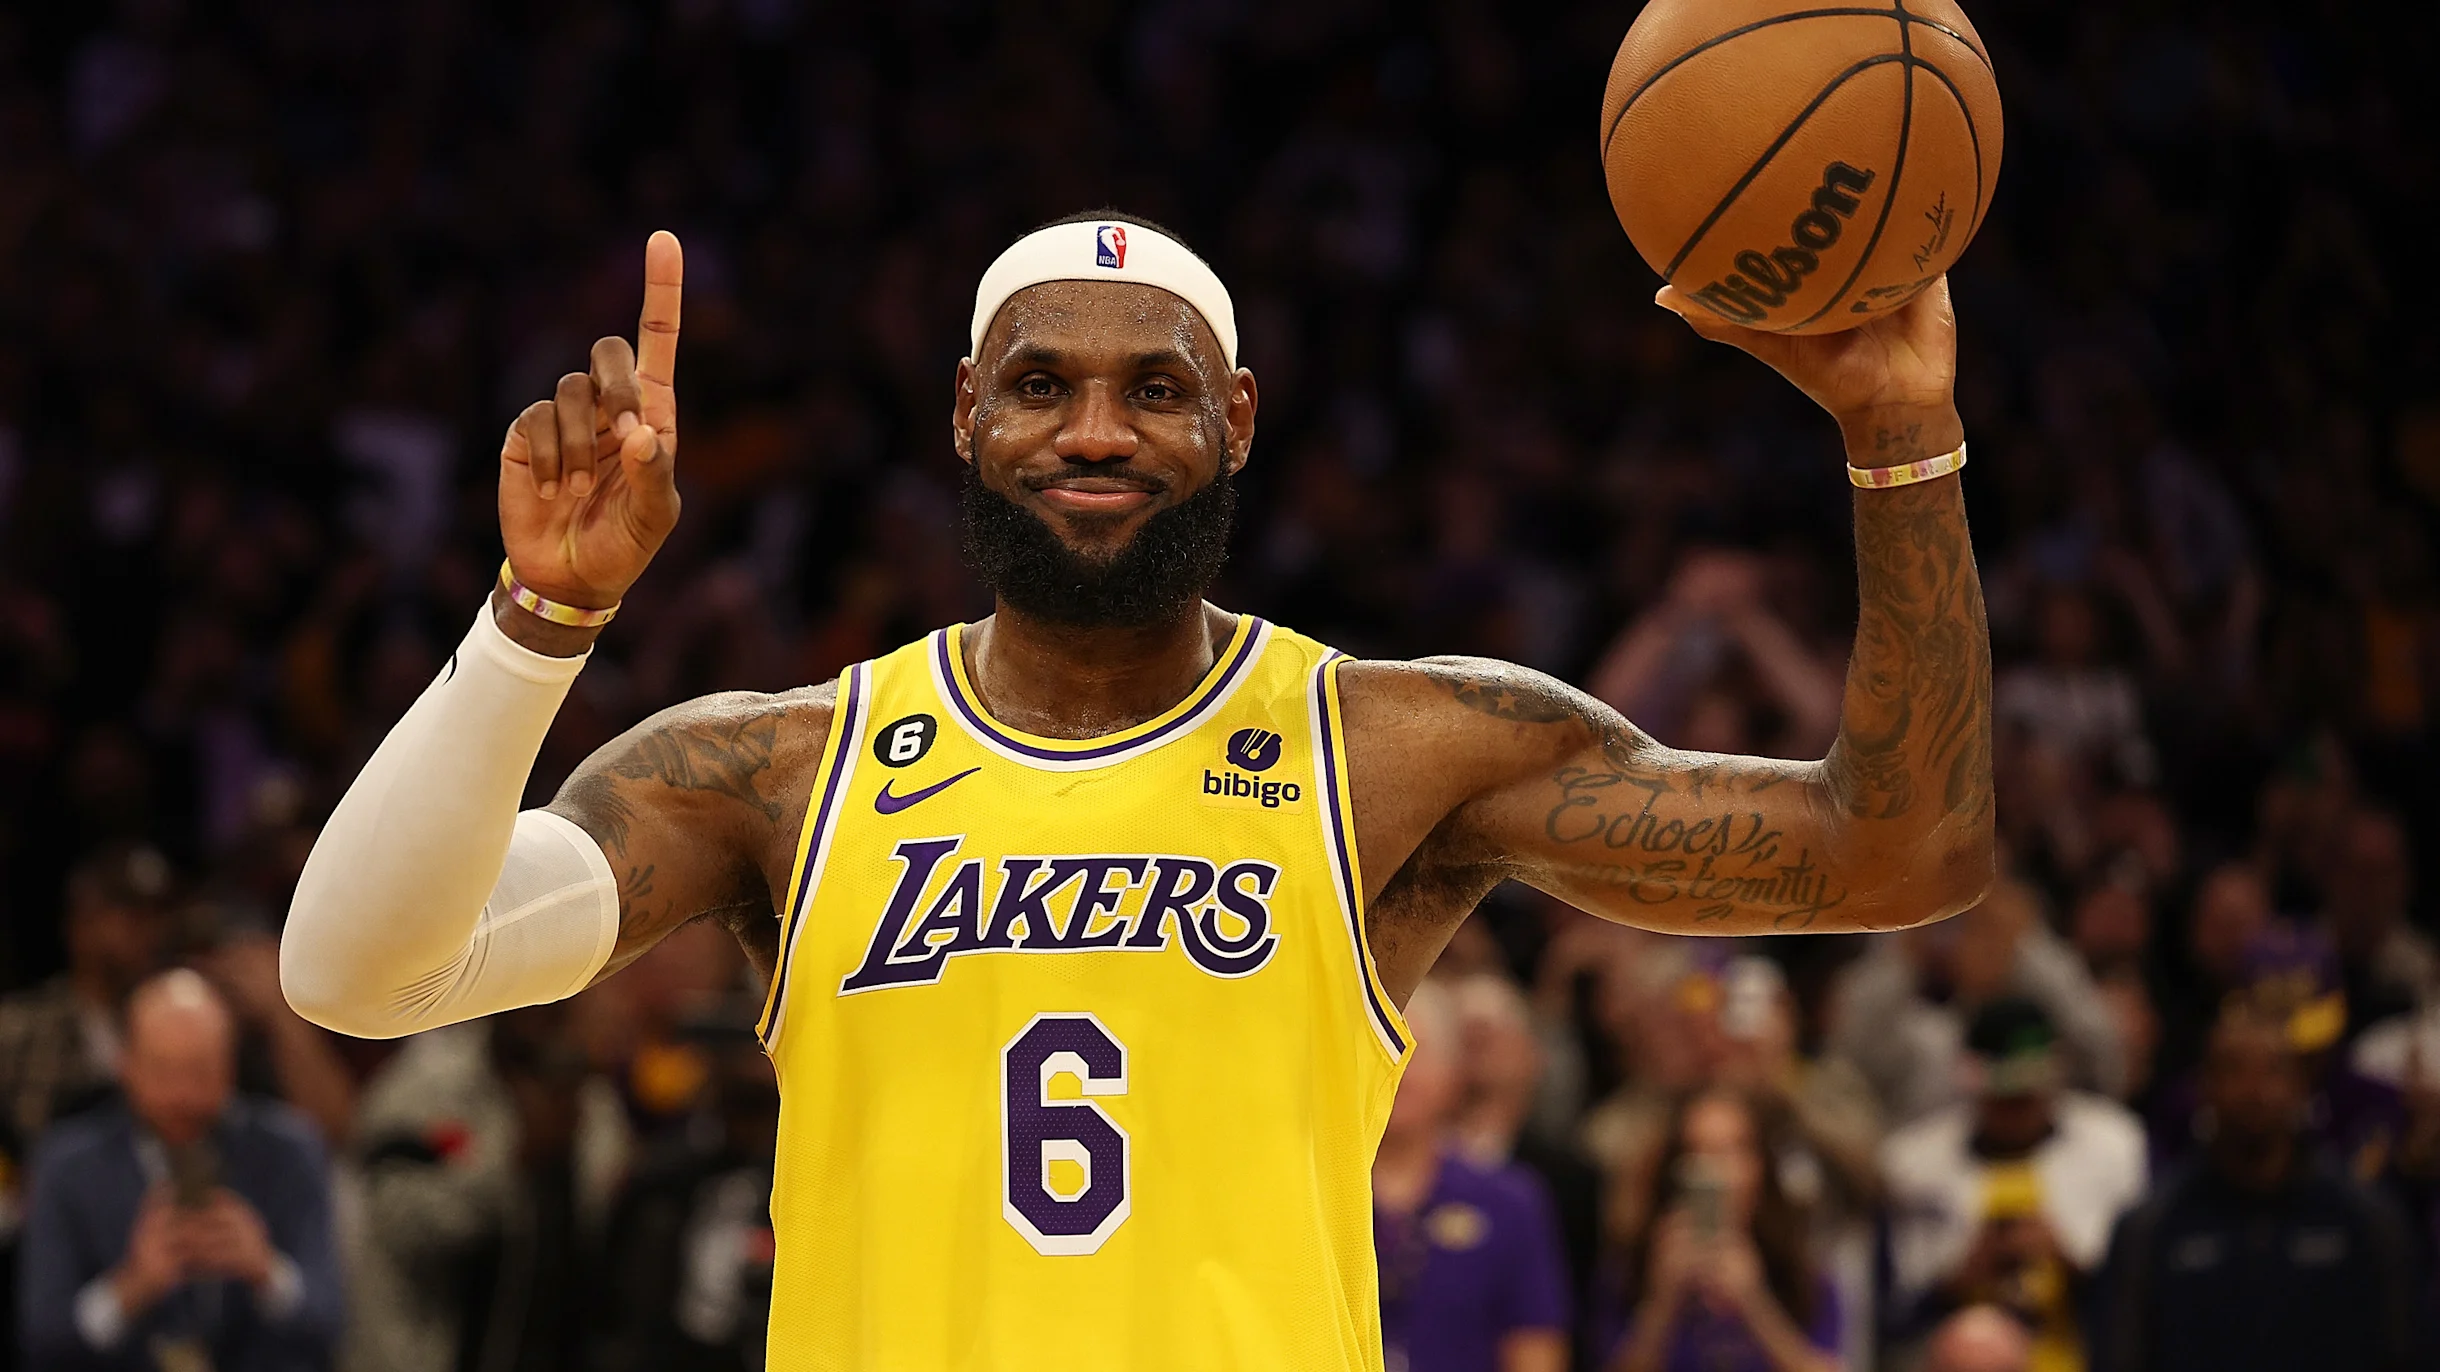 LeBron's Free Throw Frustration: Why the Lakers Feel Cheated by NBA Refs